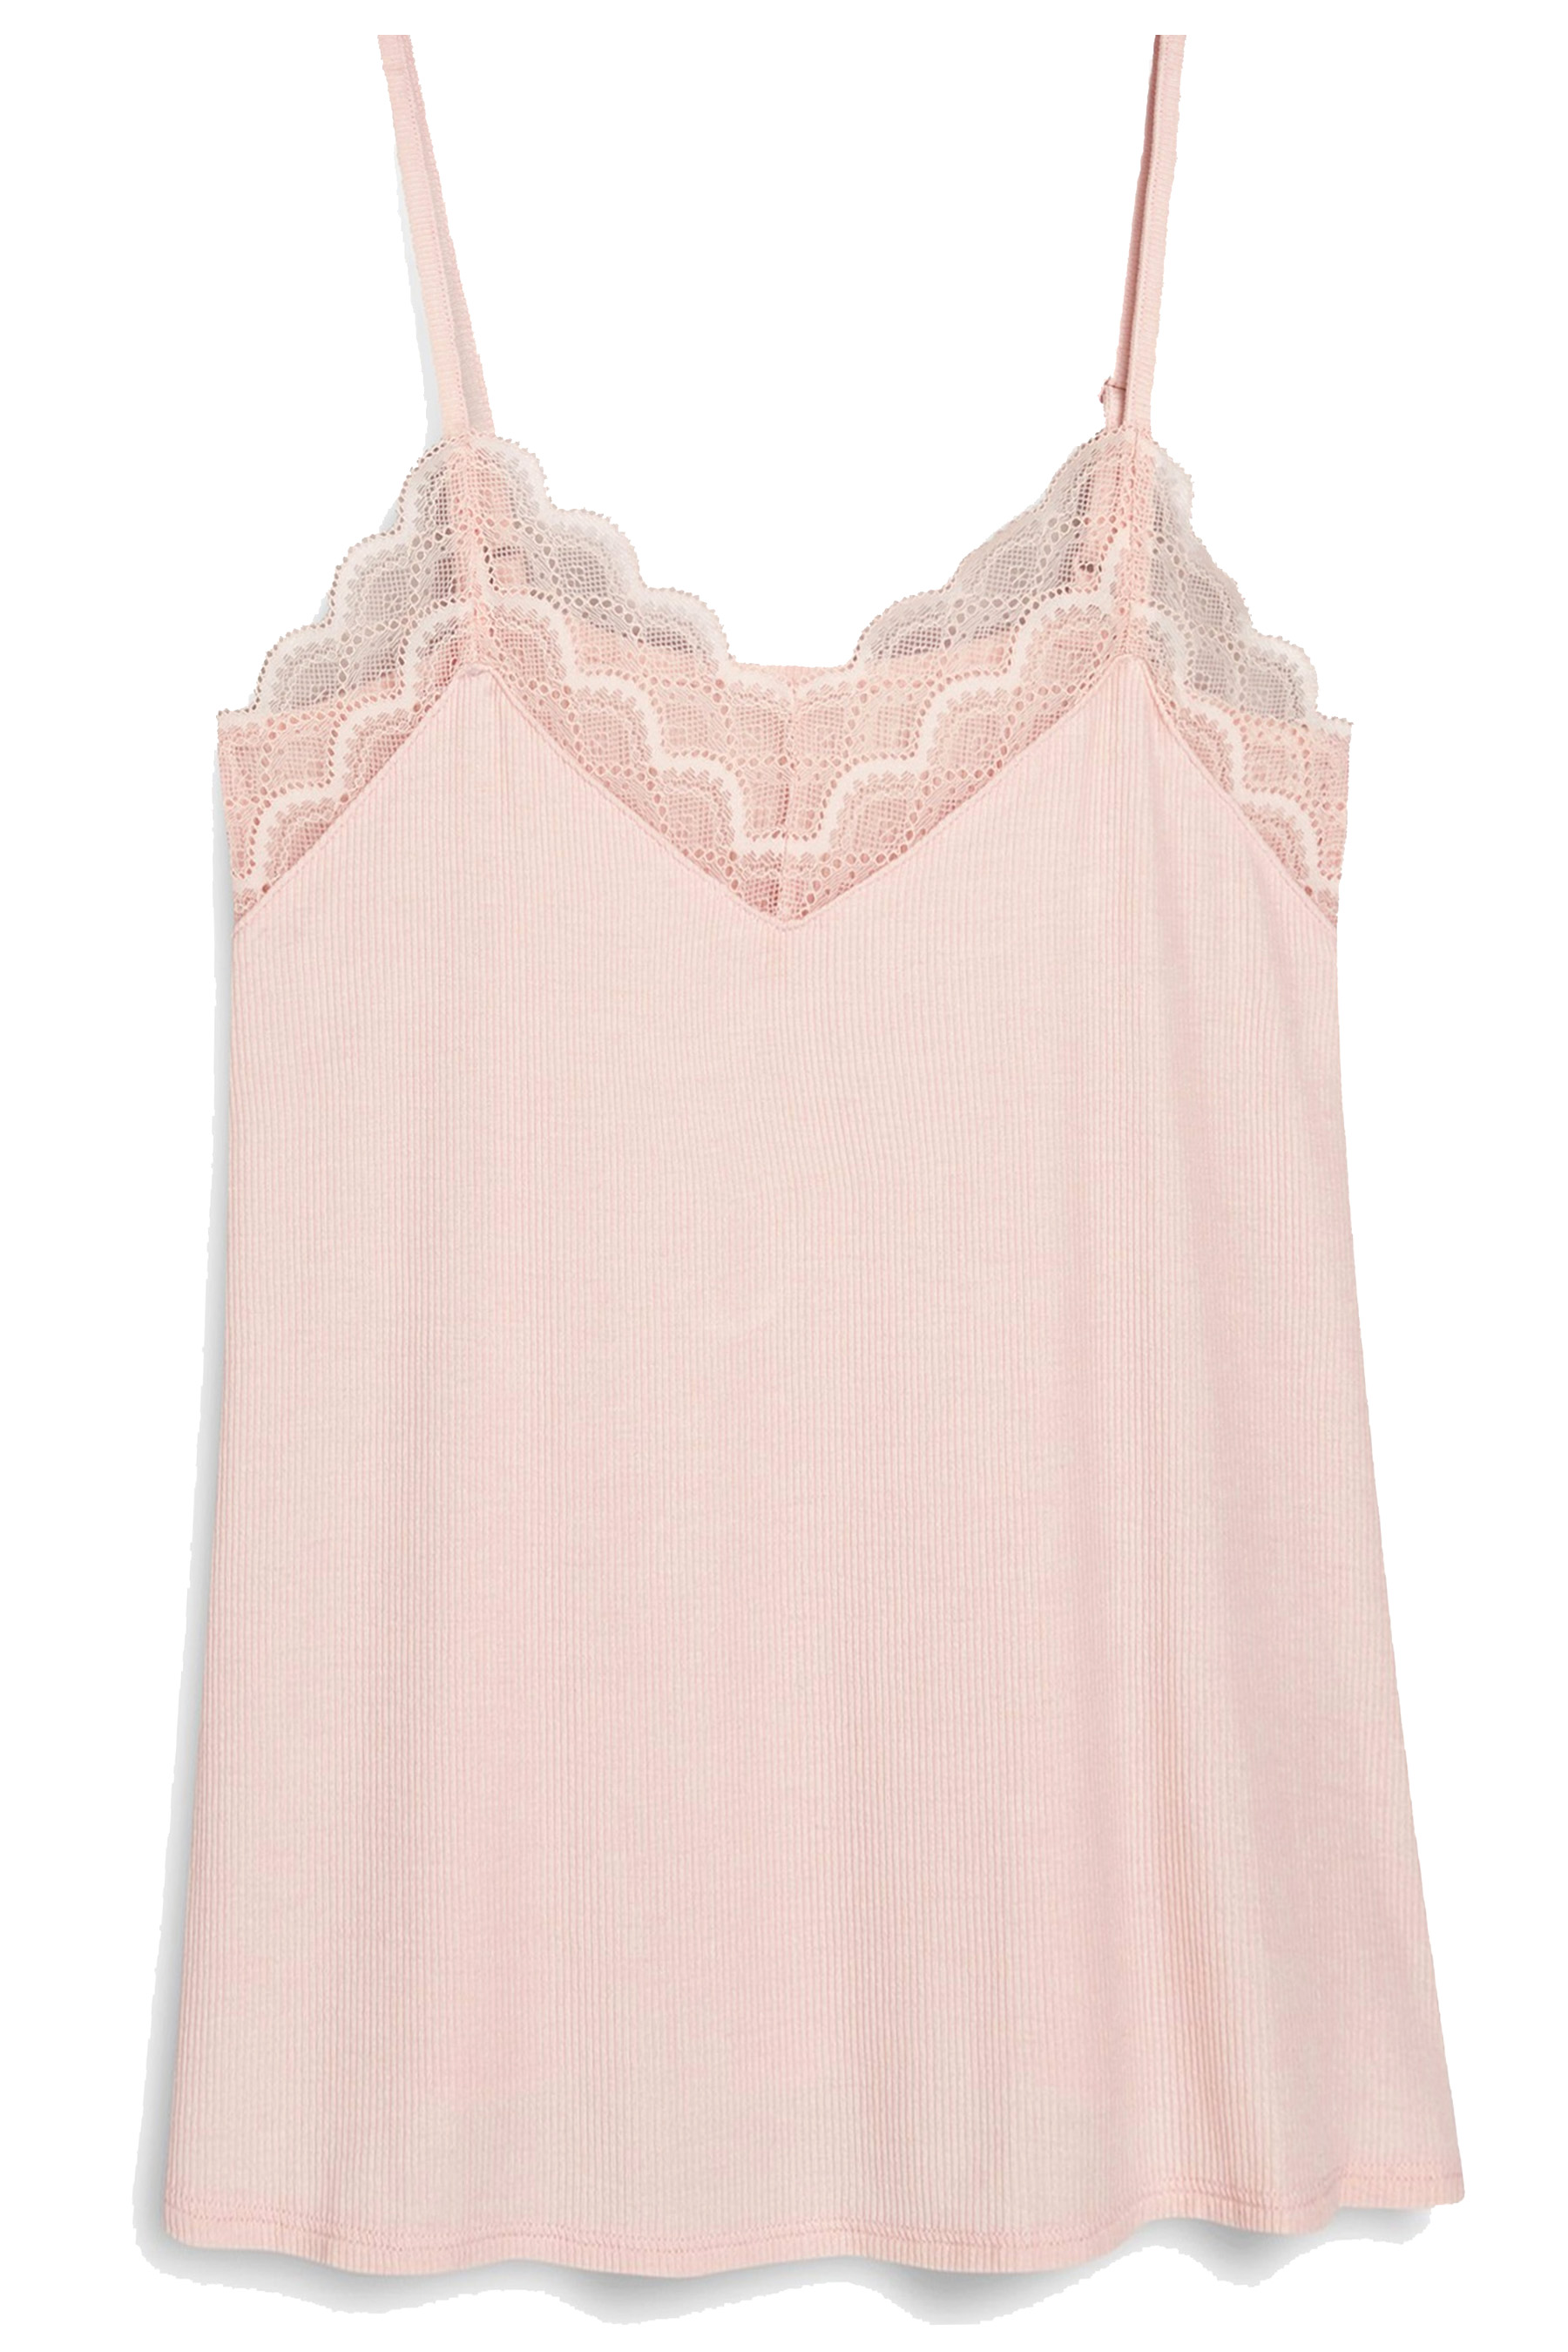 BLUSH Lace Trim Camisole - Size 8 to 12